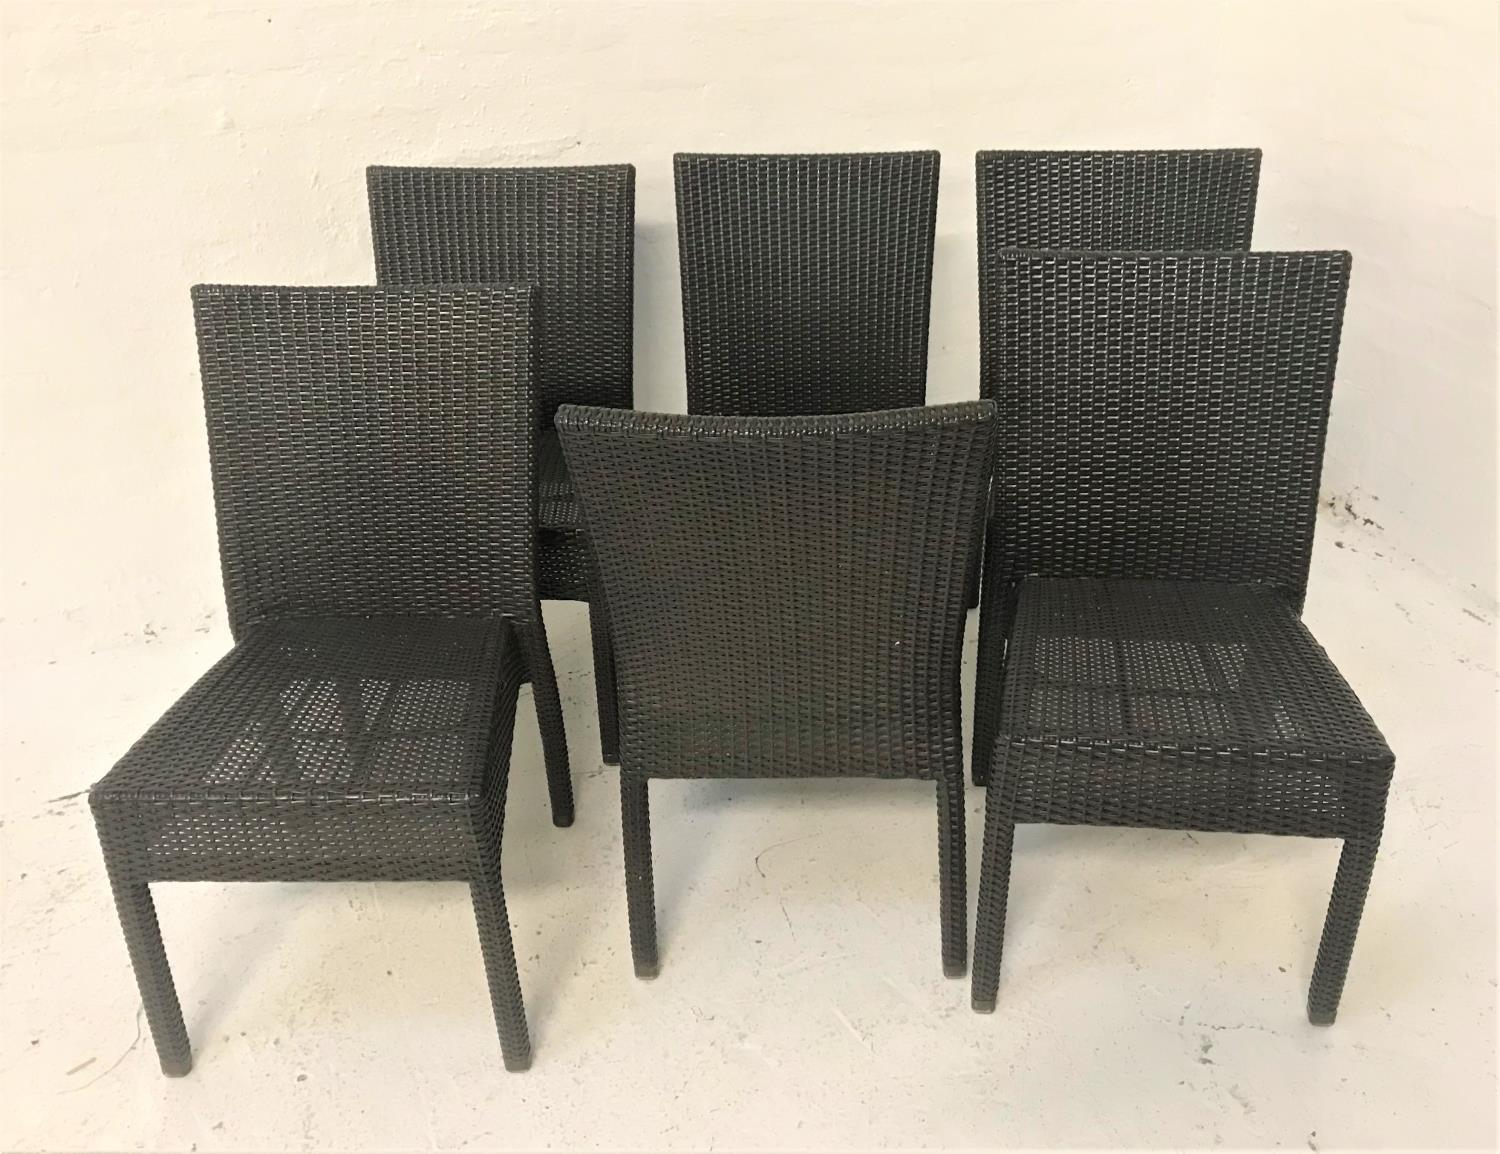 SET OF SIX ALL WEATHER RATTAN EFFECT CHAIRS with woven backs and seats, standing on plain